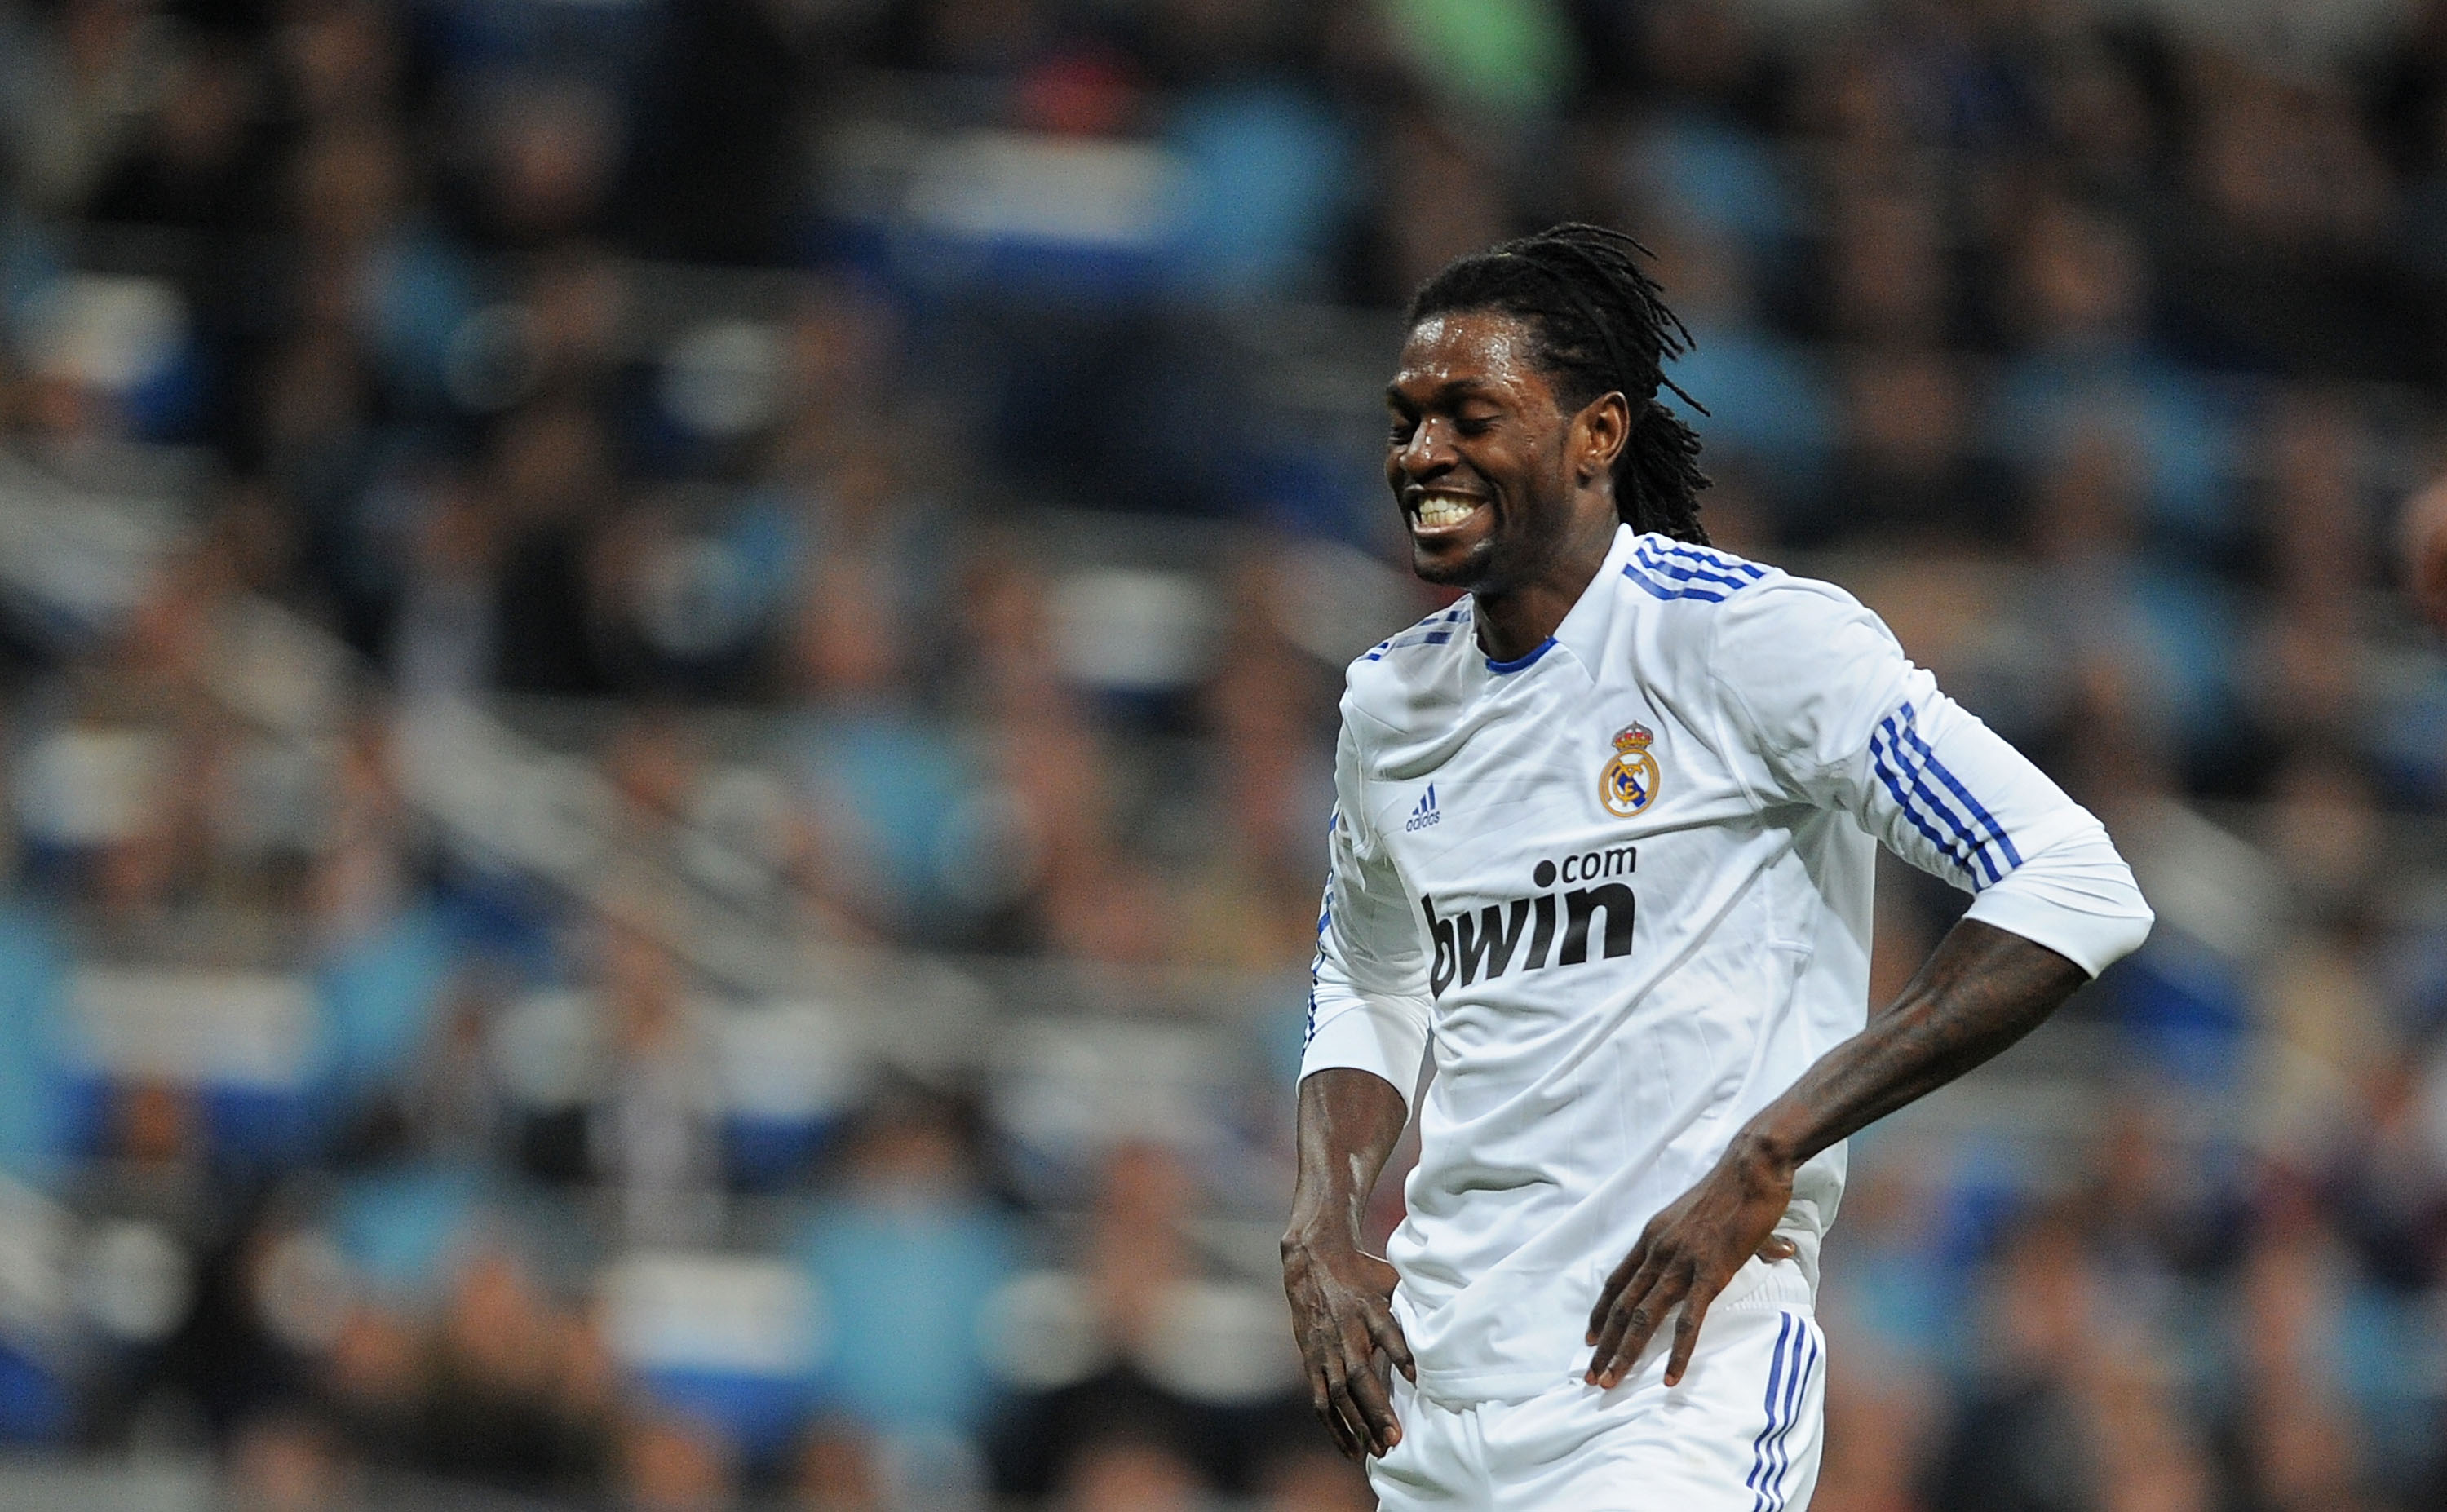 MADRID, SPAIN - FEBRUARY 06:  Emmanuel Adebayor of Real Madrid reacts during the La Liga match between Real Madrid and Real Sociedad at Estadio Santiago Bernabeu on February 6, 2011 in Madrid, Spain.  (Photo by Denis Doyle/Getty Images)